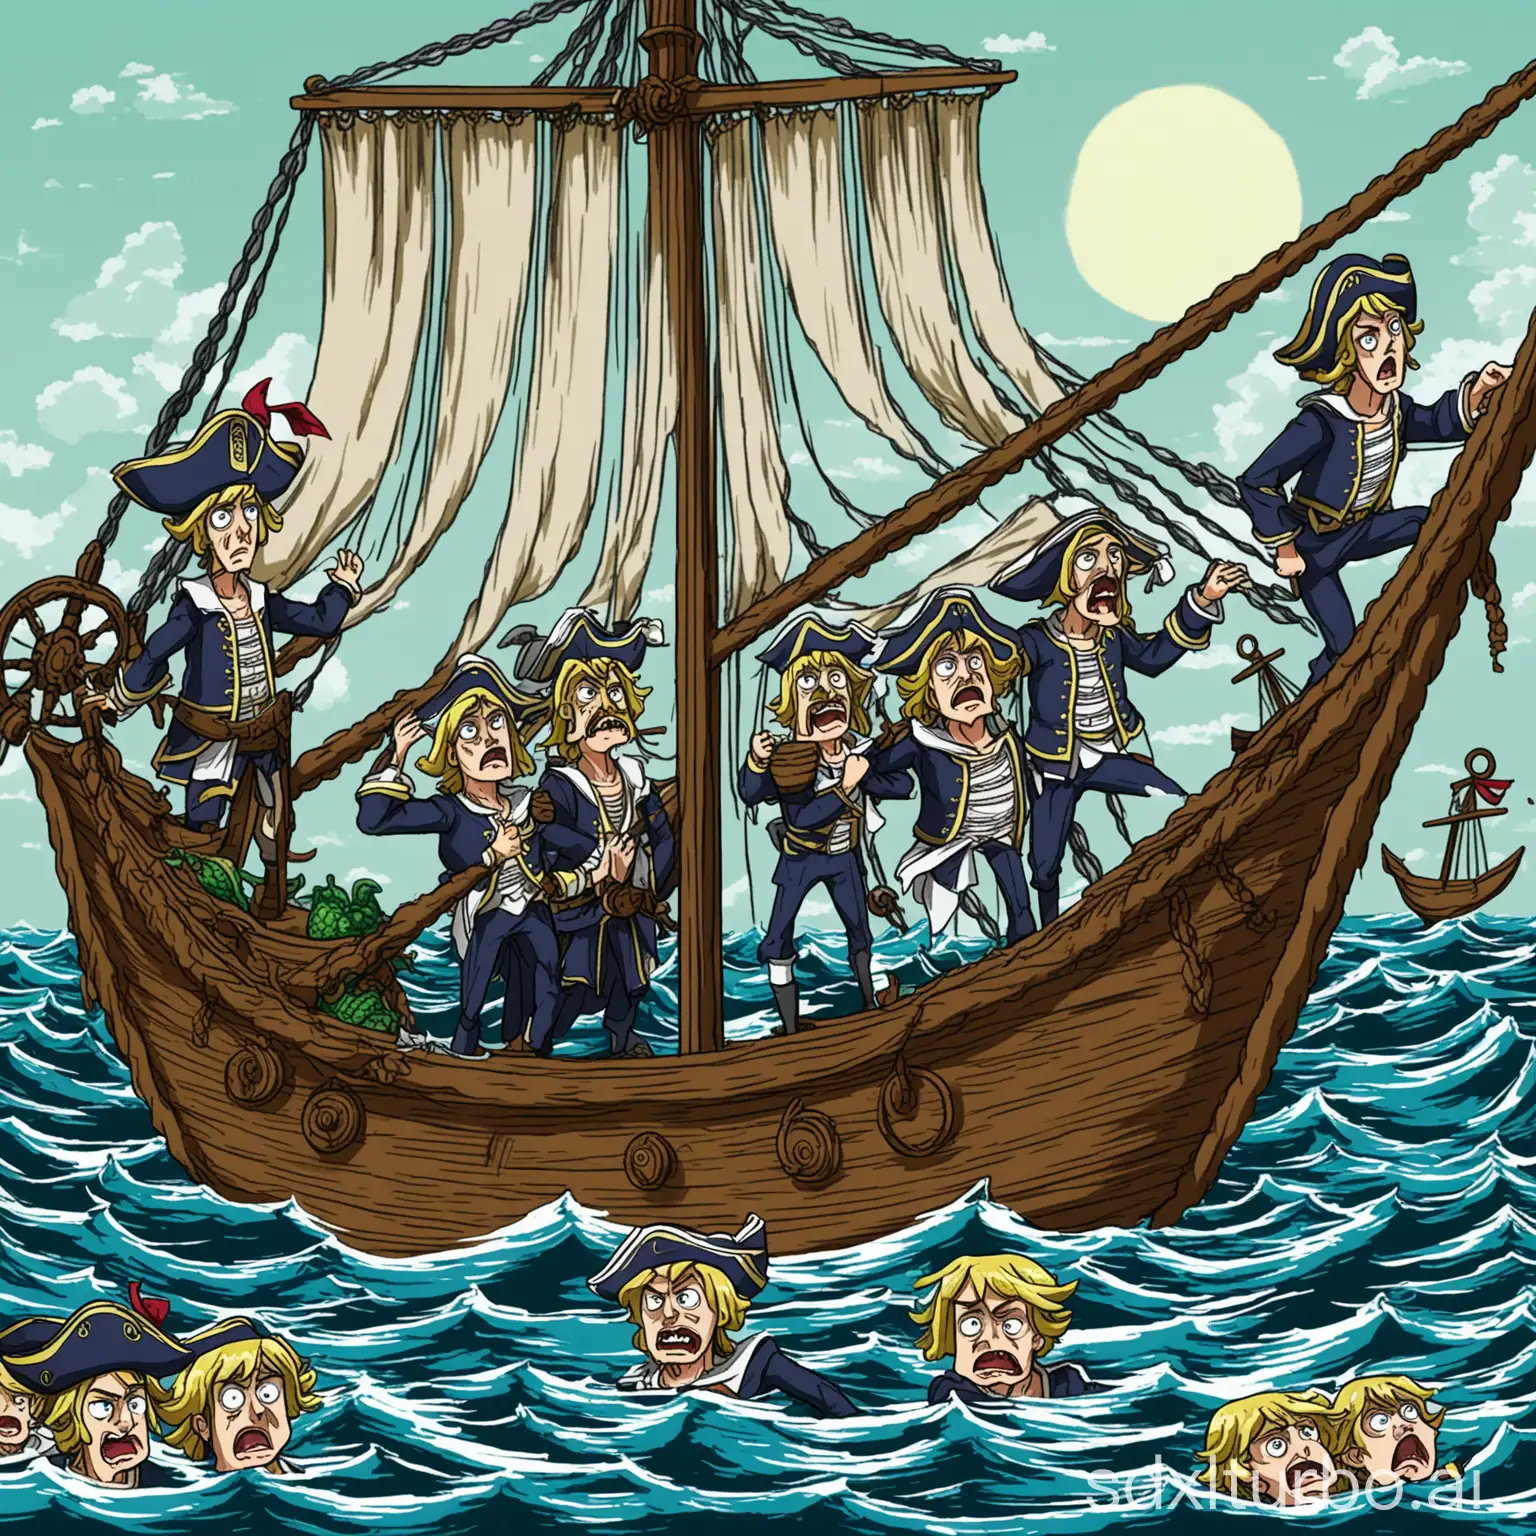 Draw an image of Columbus and his sailors suffering from scurvy on the sea, in a two-dimensional anime style.